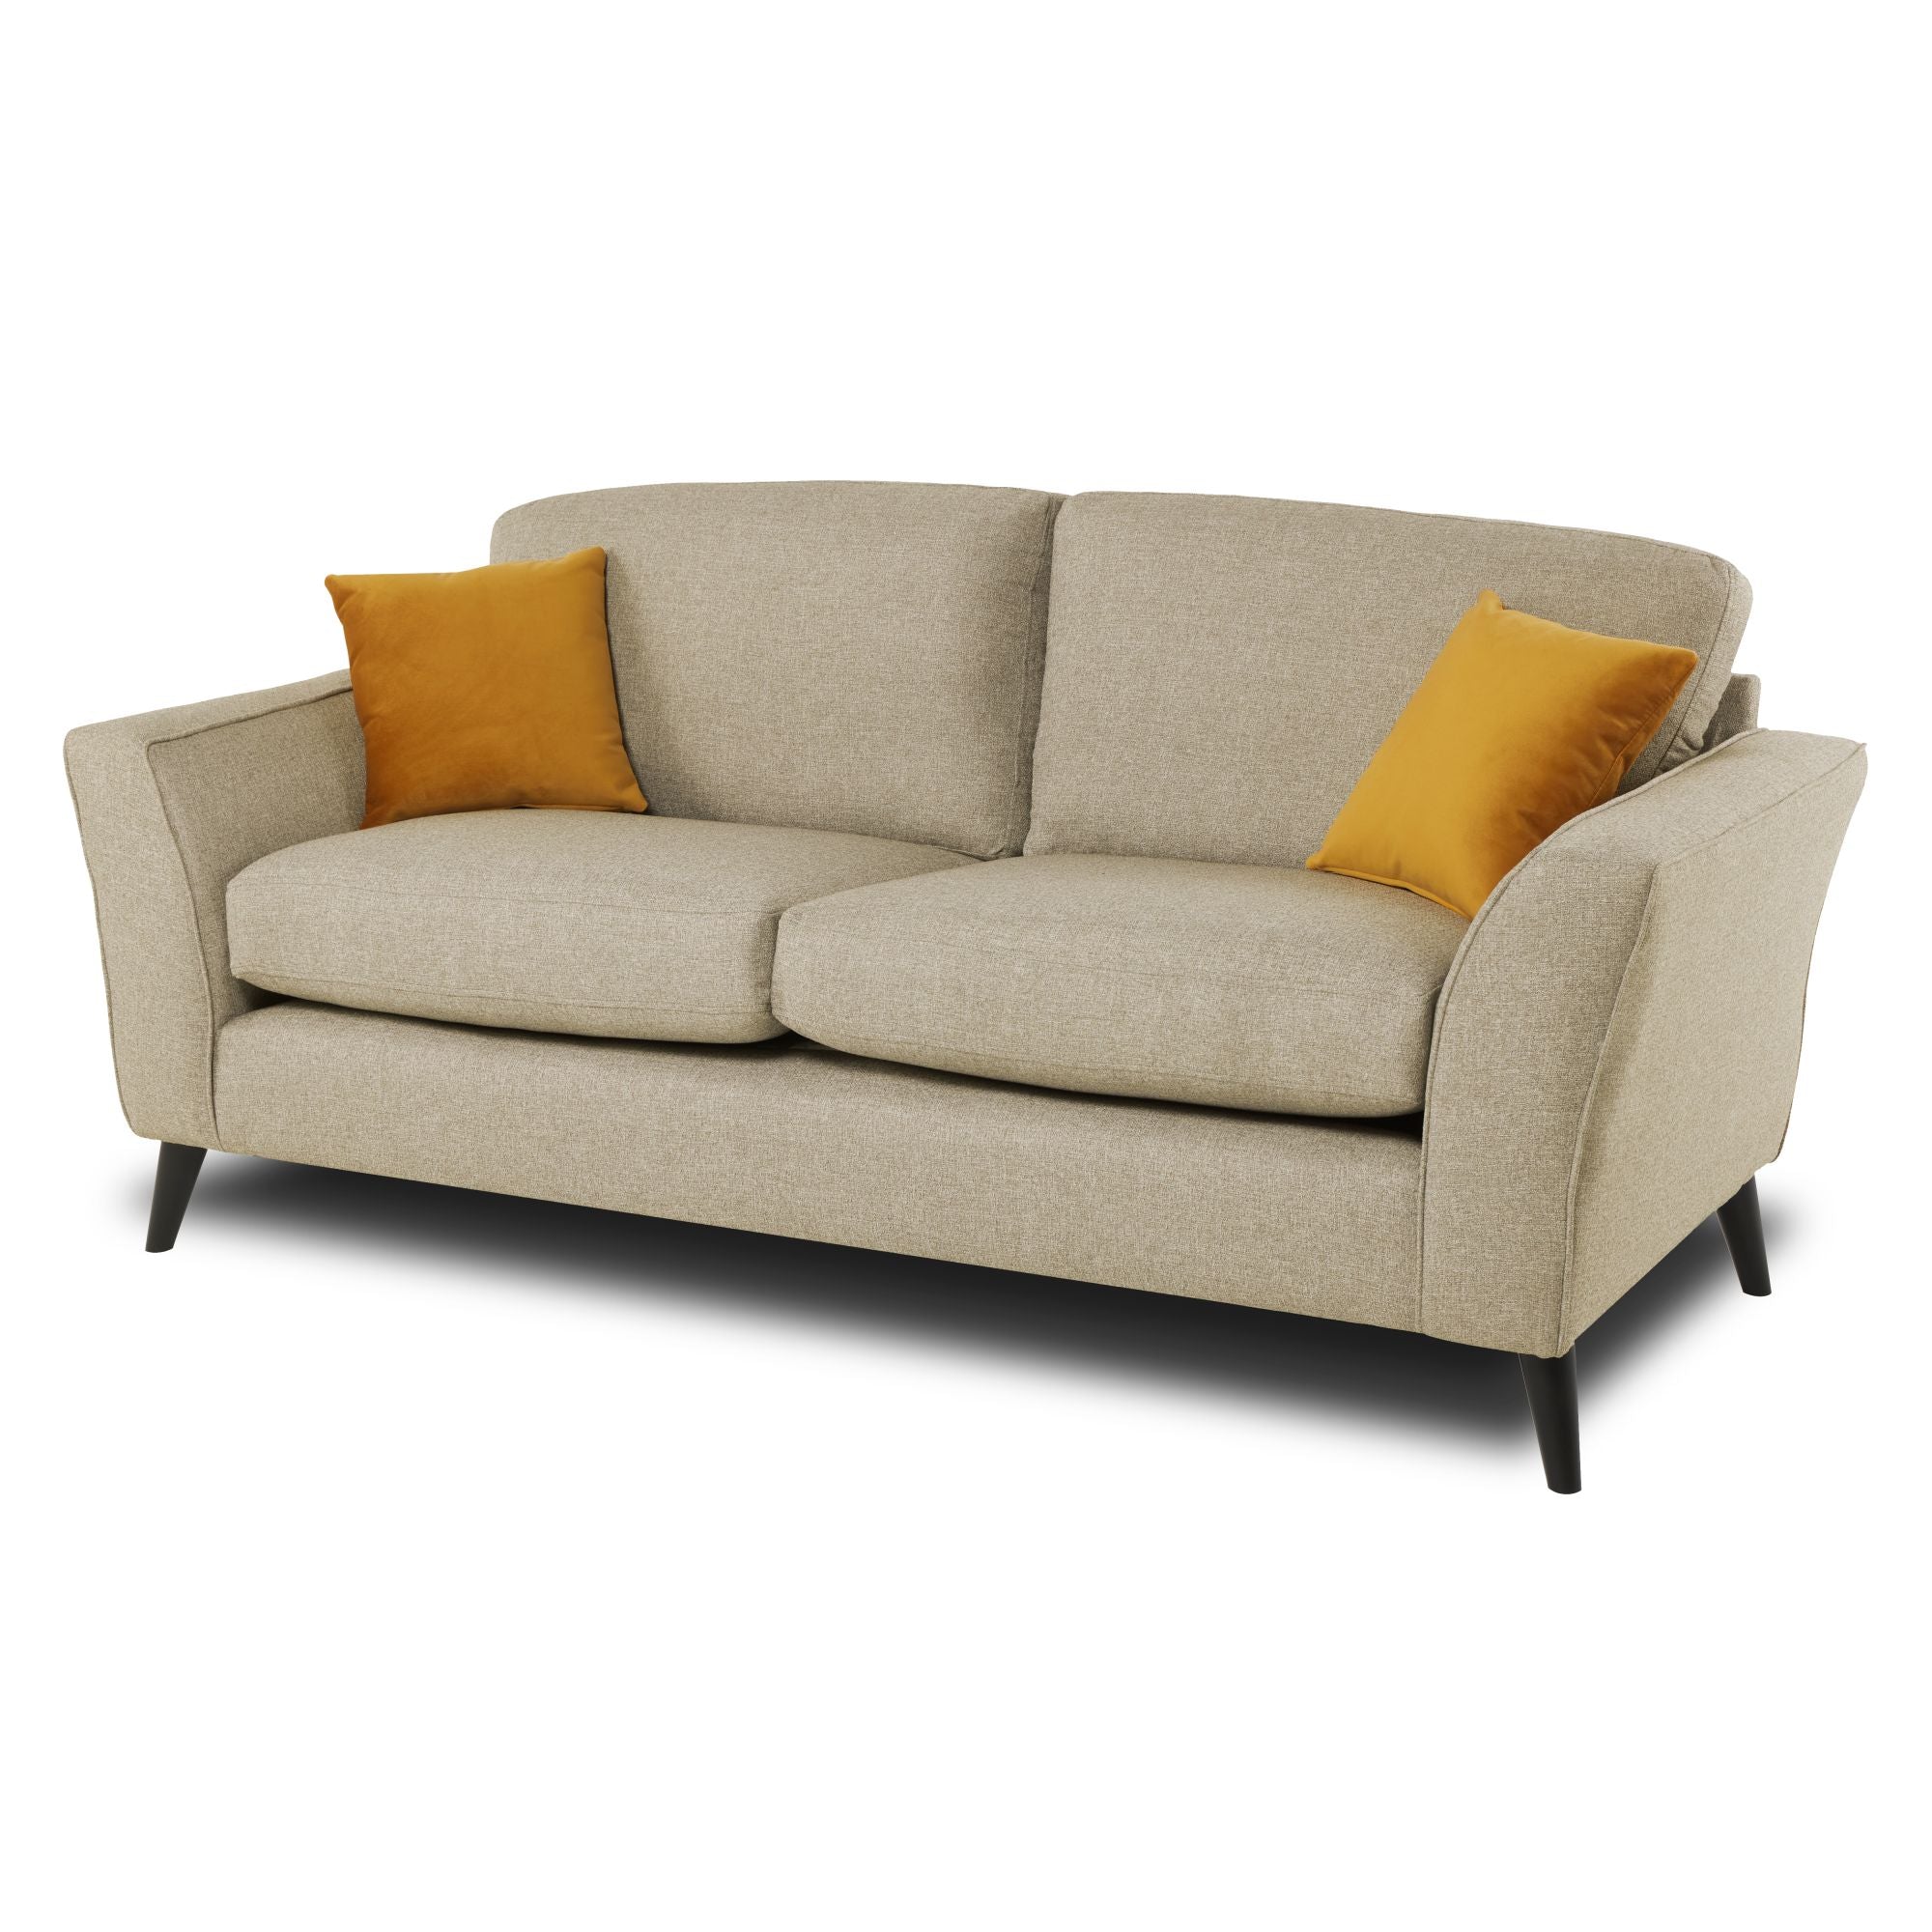 Libby 3 seater sofa in oatmeal shown on an angle with a white background 